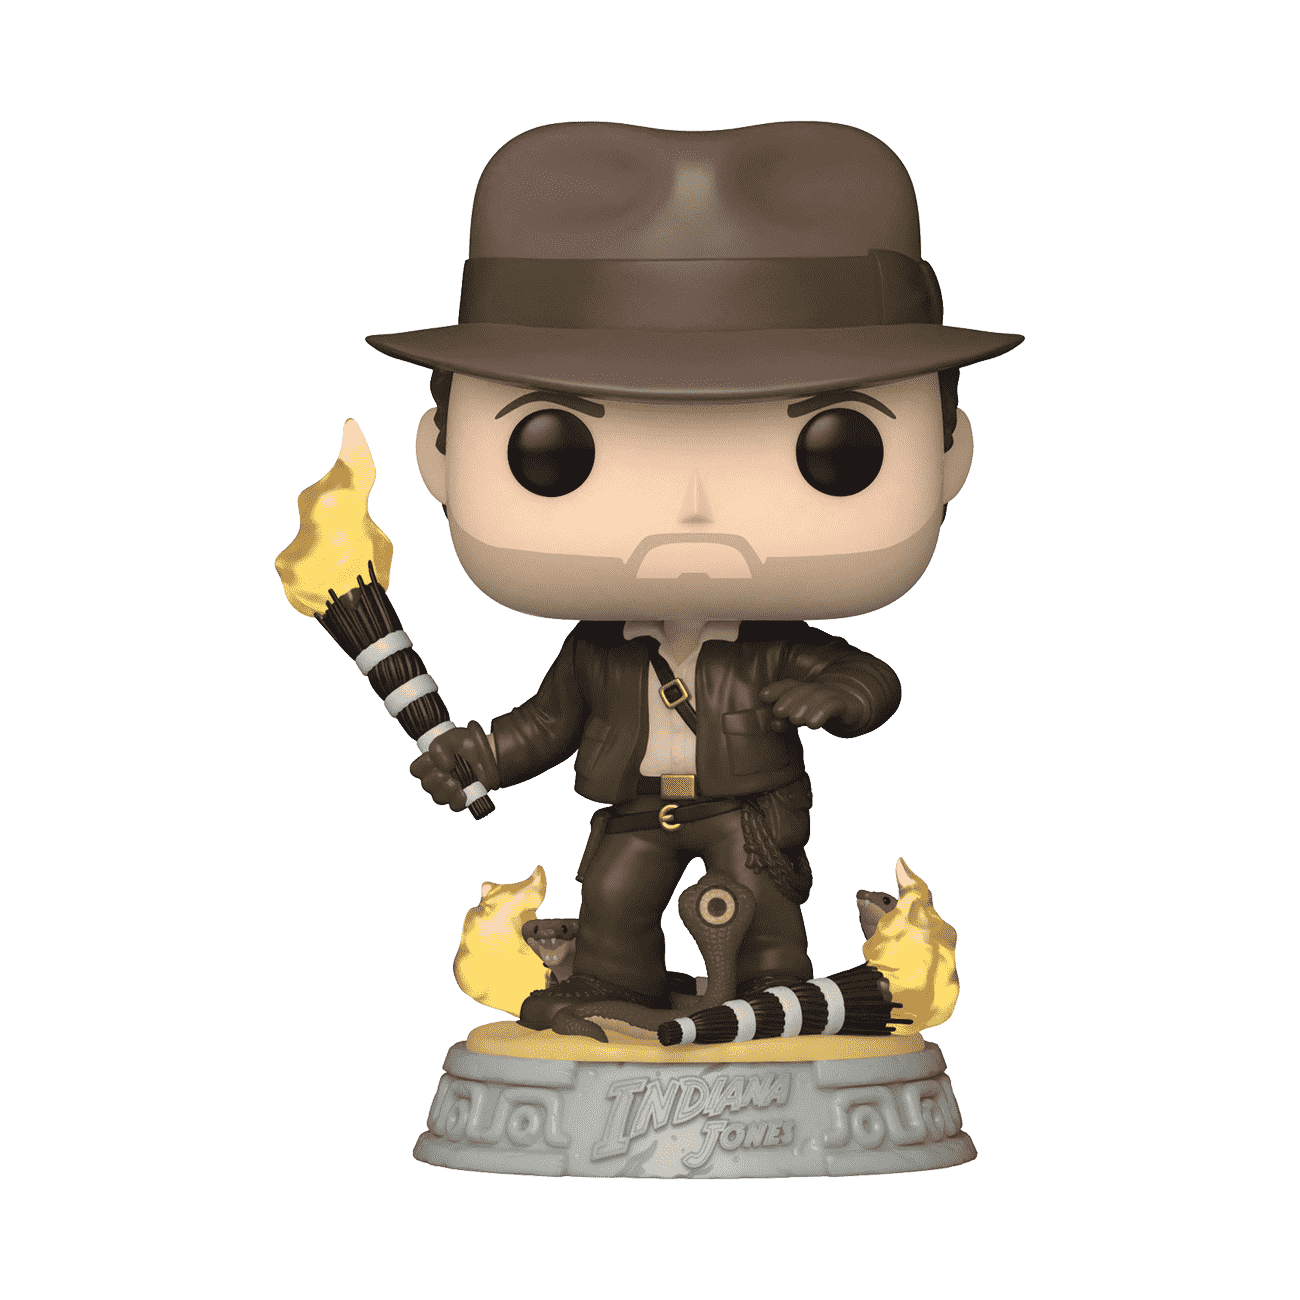 Paulie Pops Indiana Jones Light Up Temple of Doom Funko Shop Exclusive Pop  found at Toys R Us! 